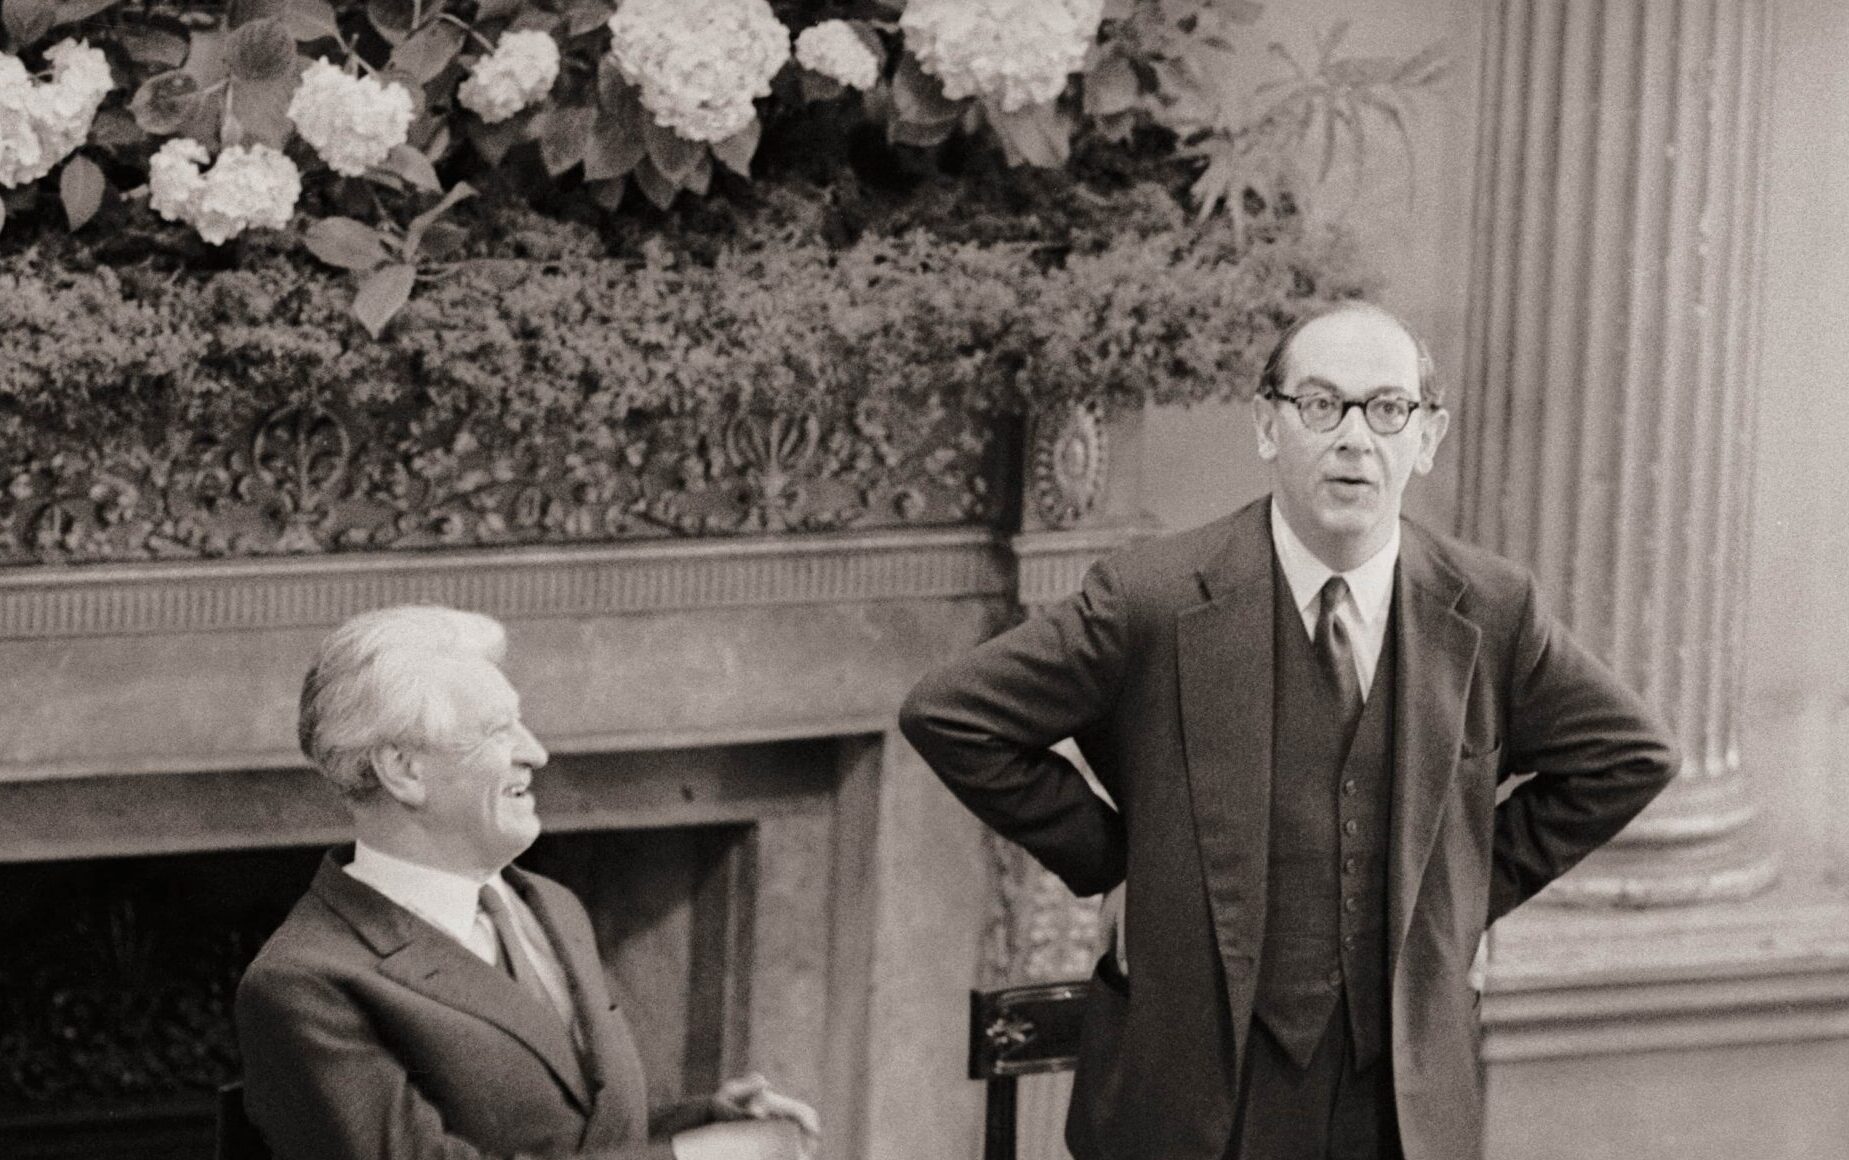 Isaiah Berlin (right) chairing a discussion at the Bath International Music Festival, June 1959 (Erich Auerbach / Stringer via Getty Images)